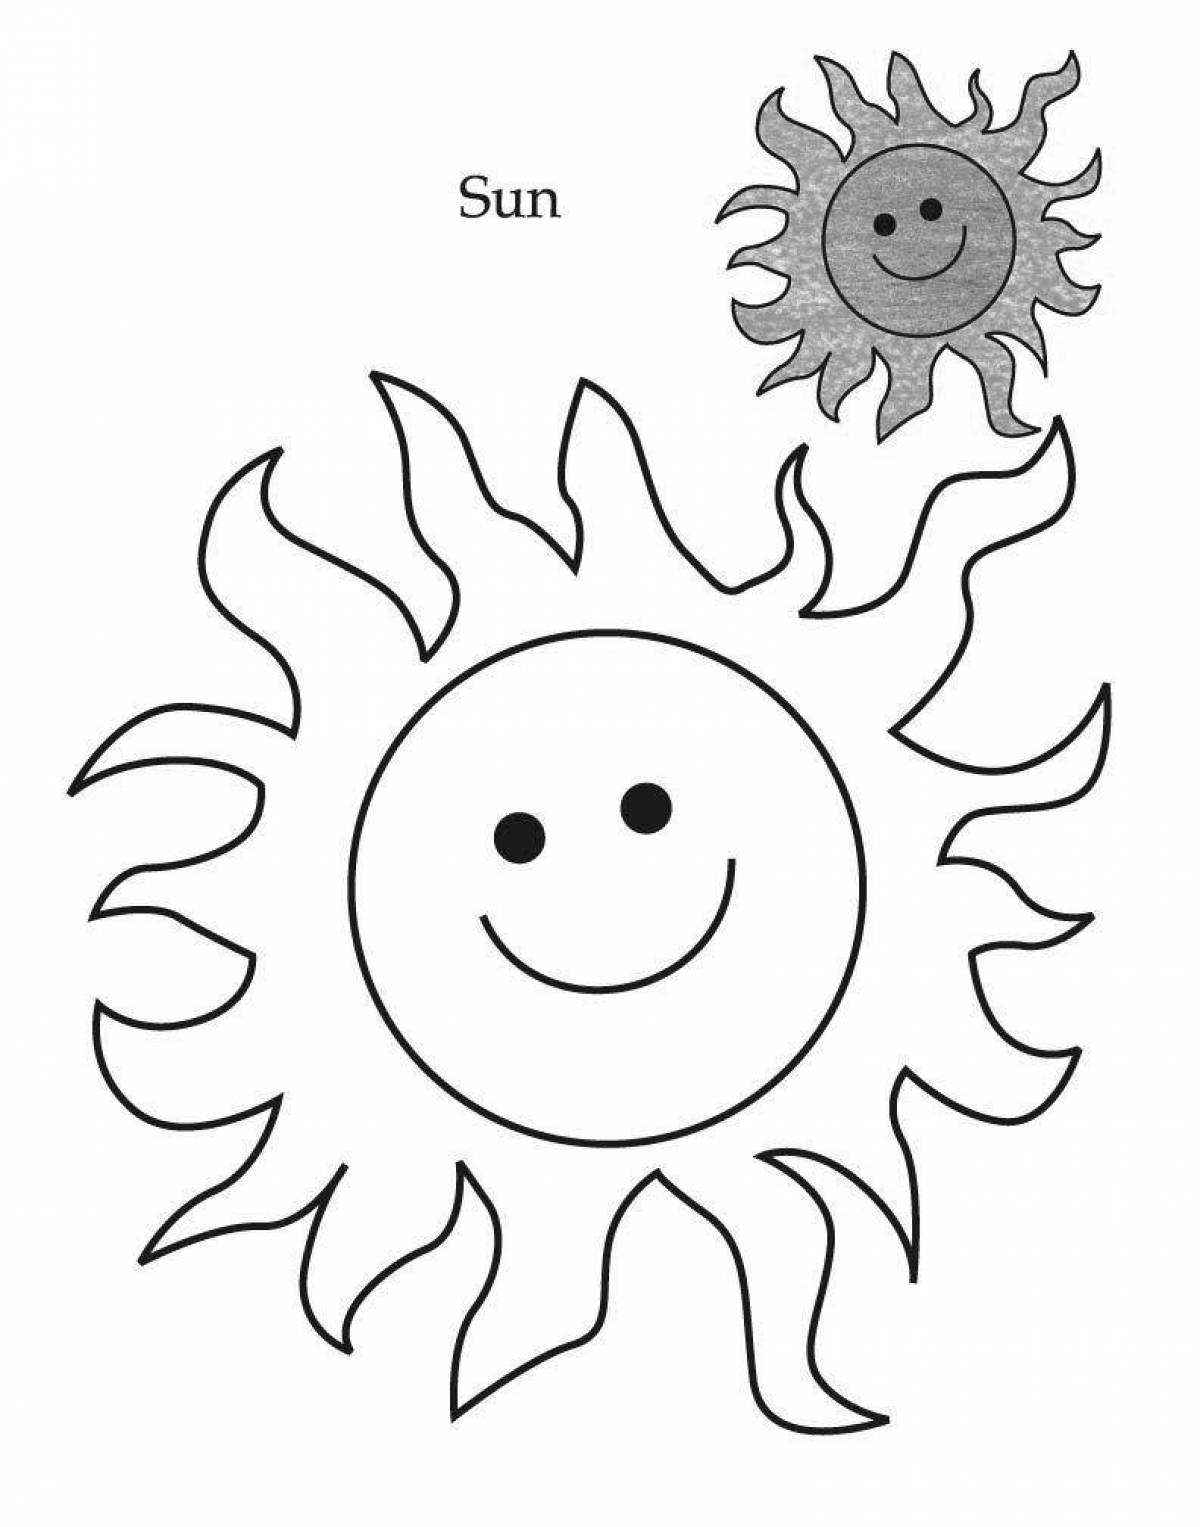 Flashing coloring page: the sun is shining